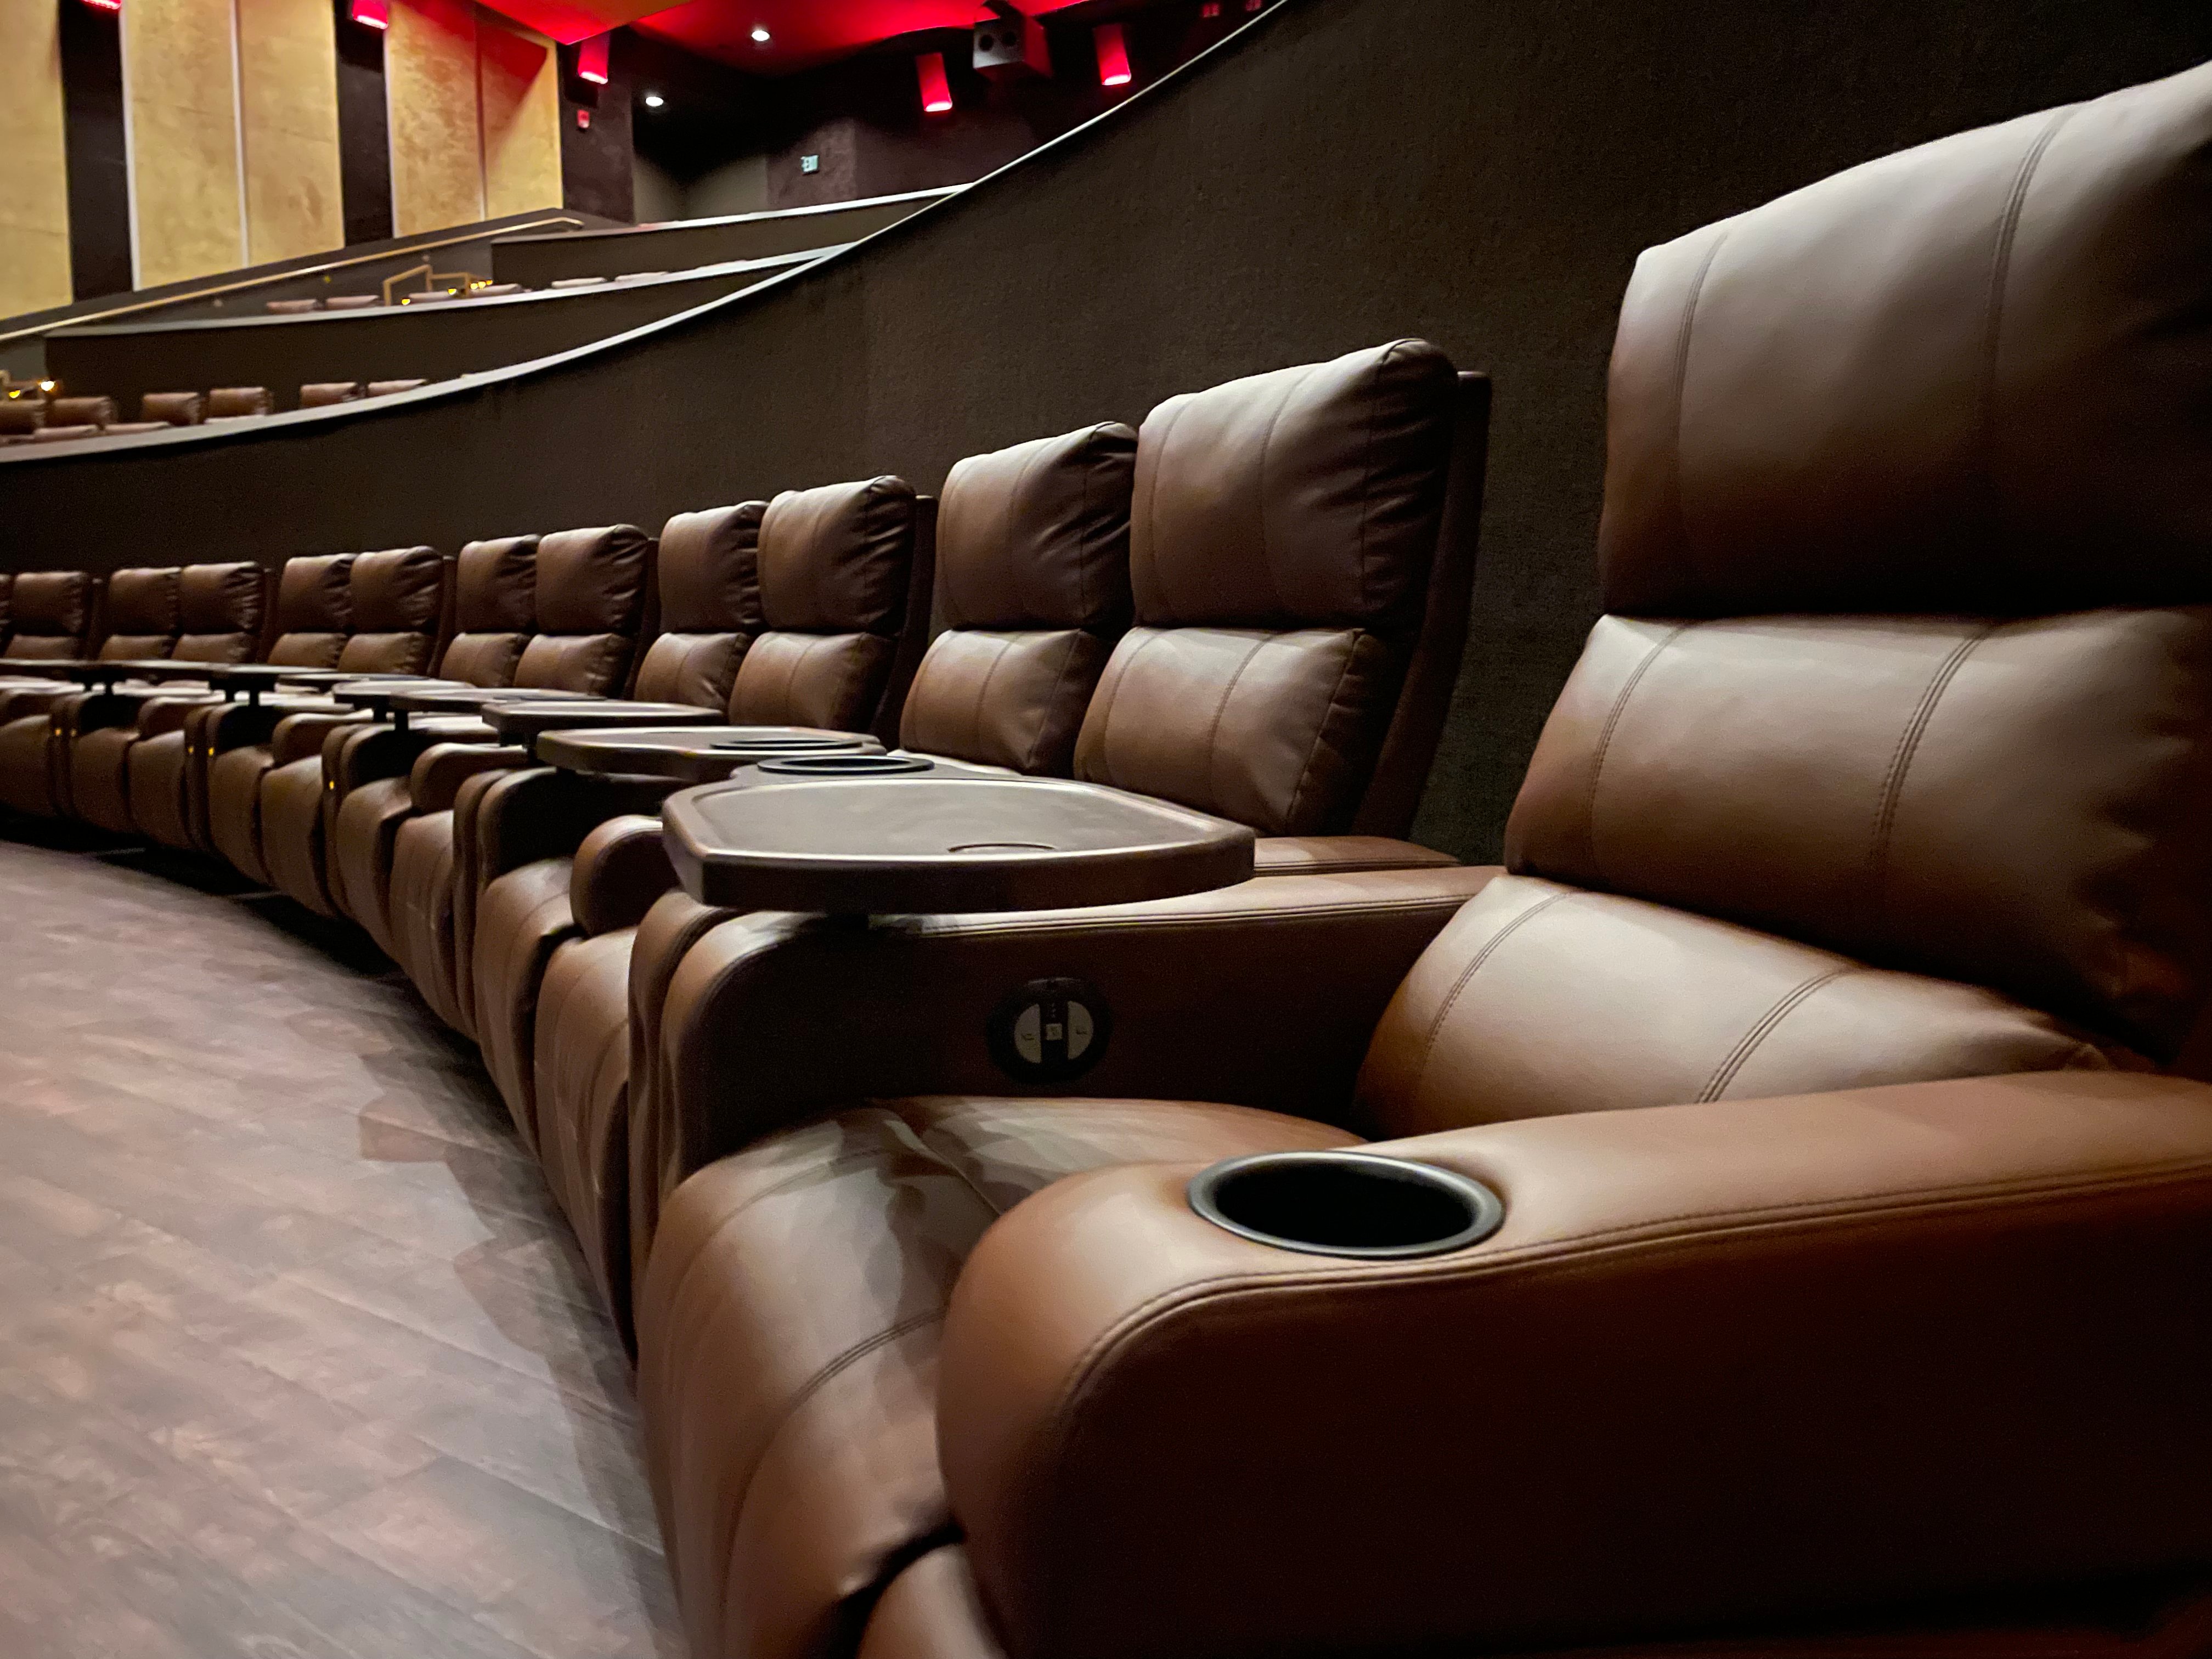 recliner seats in theater